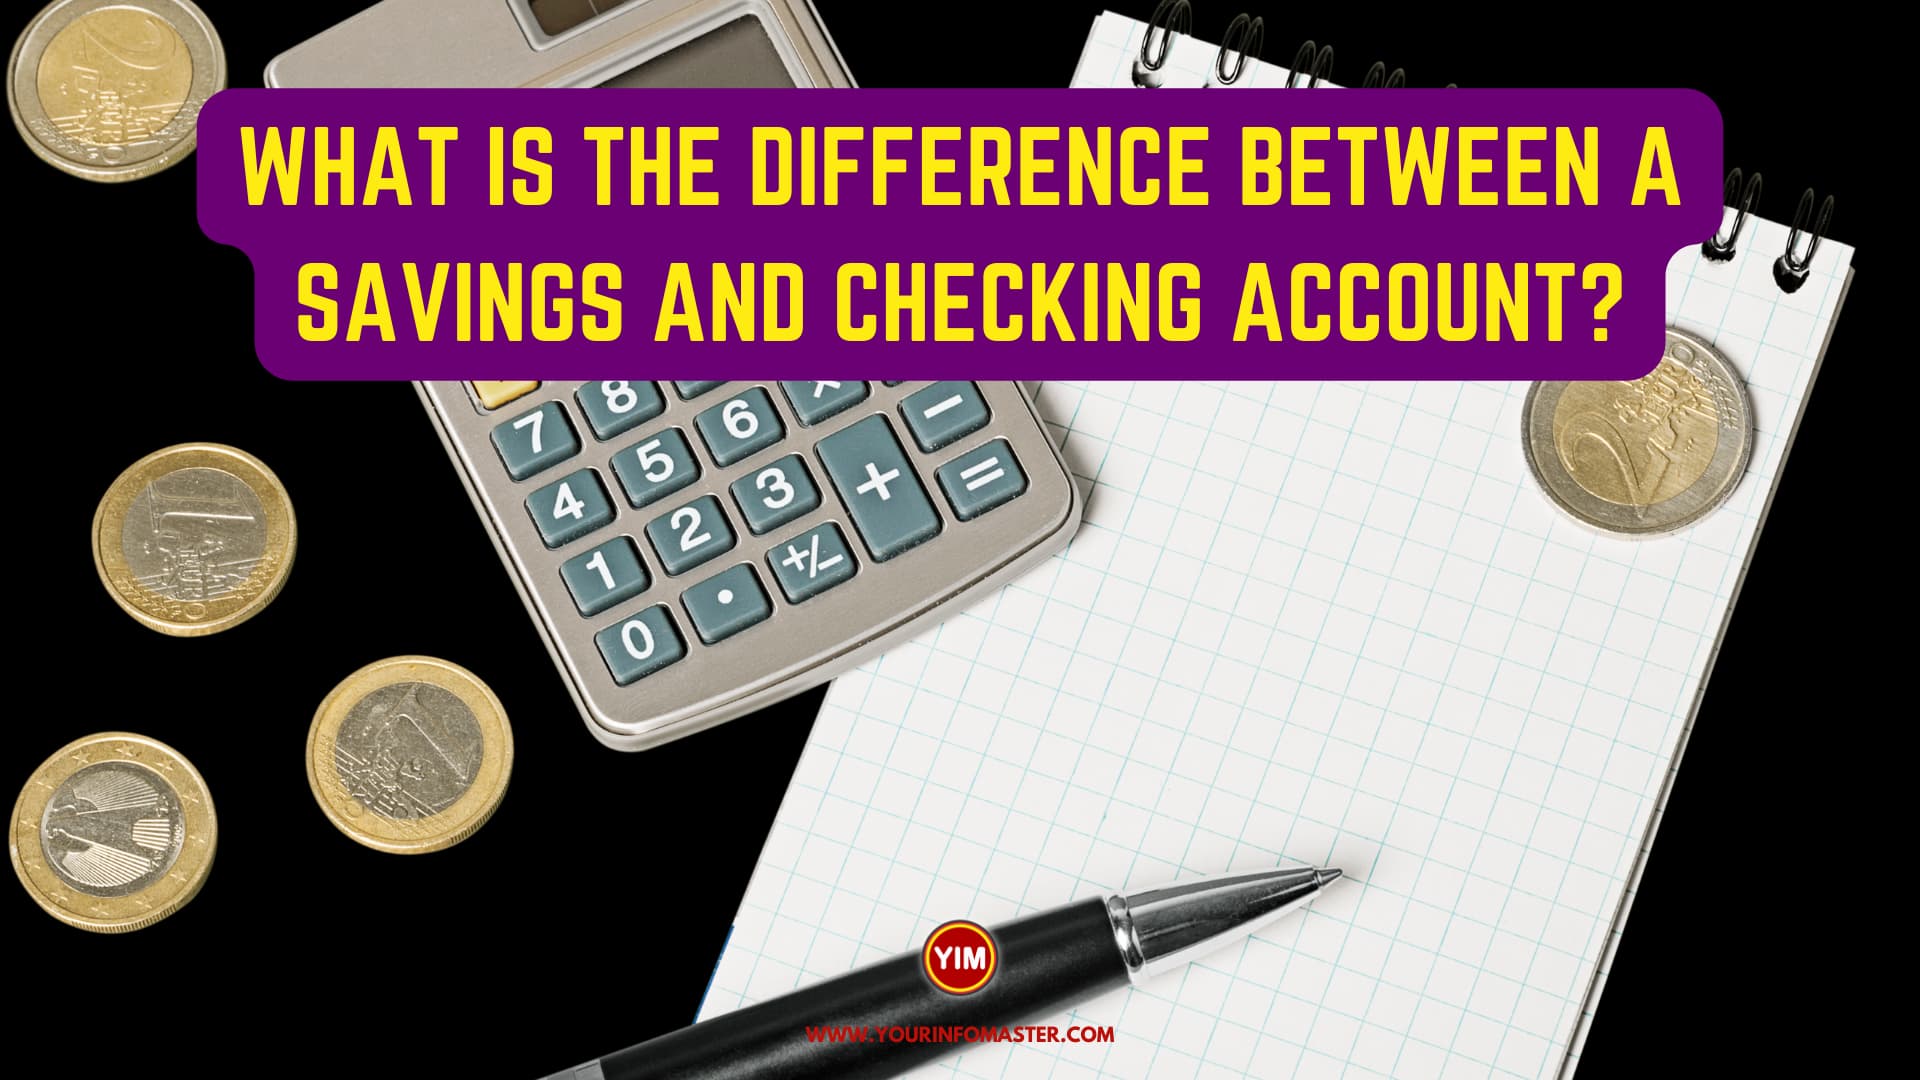 What is the difference between a savings and checking account